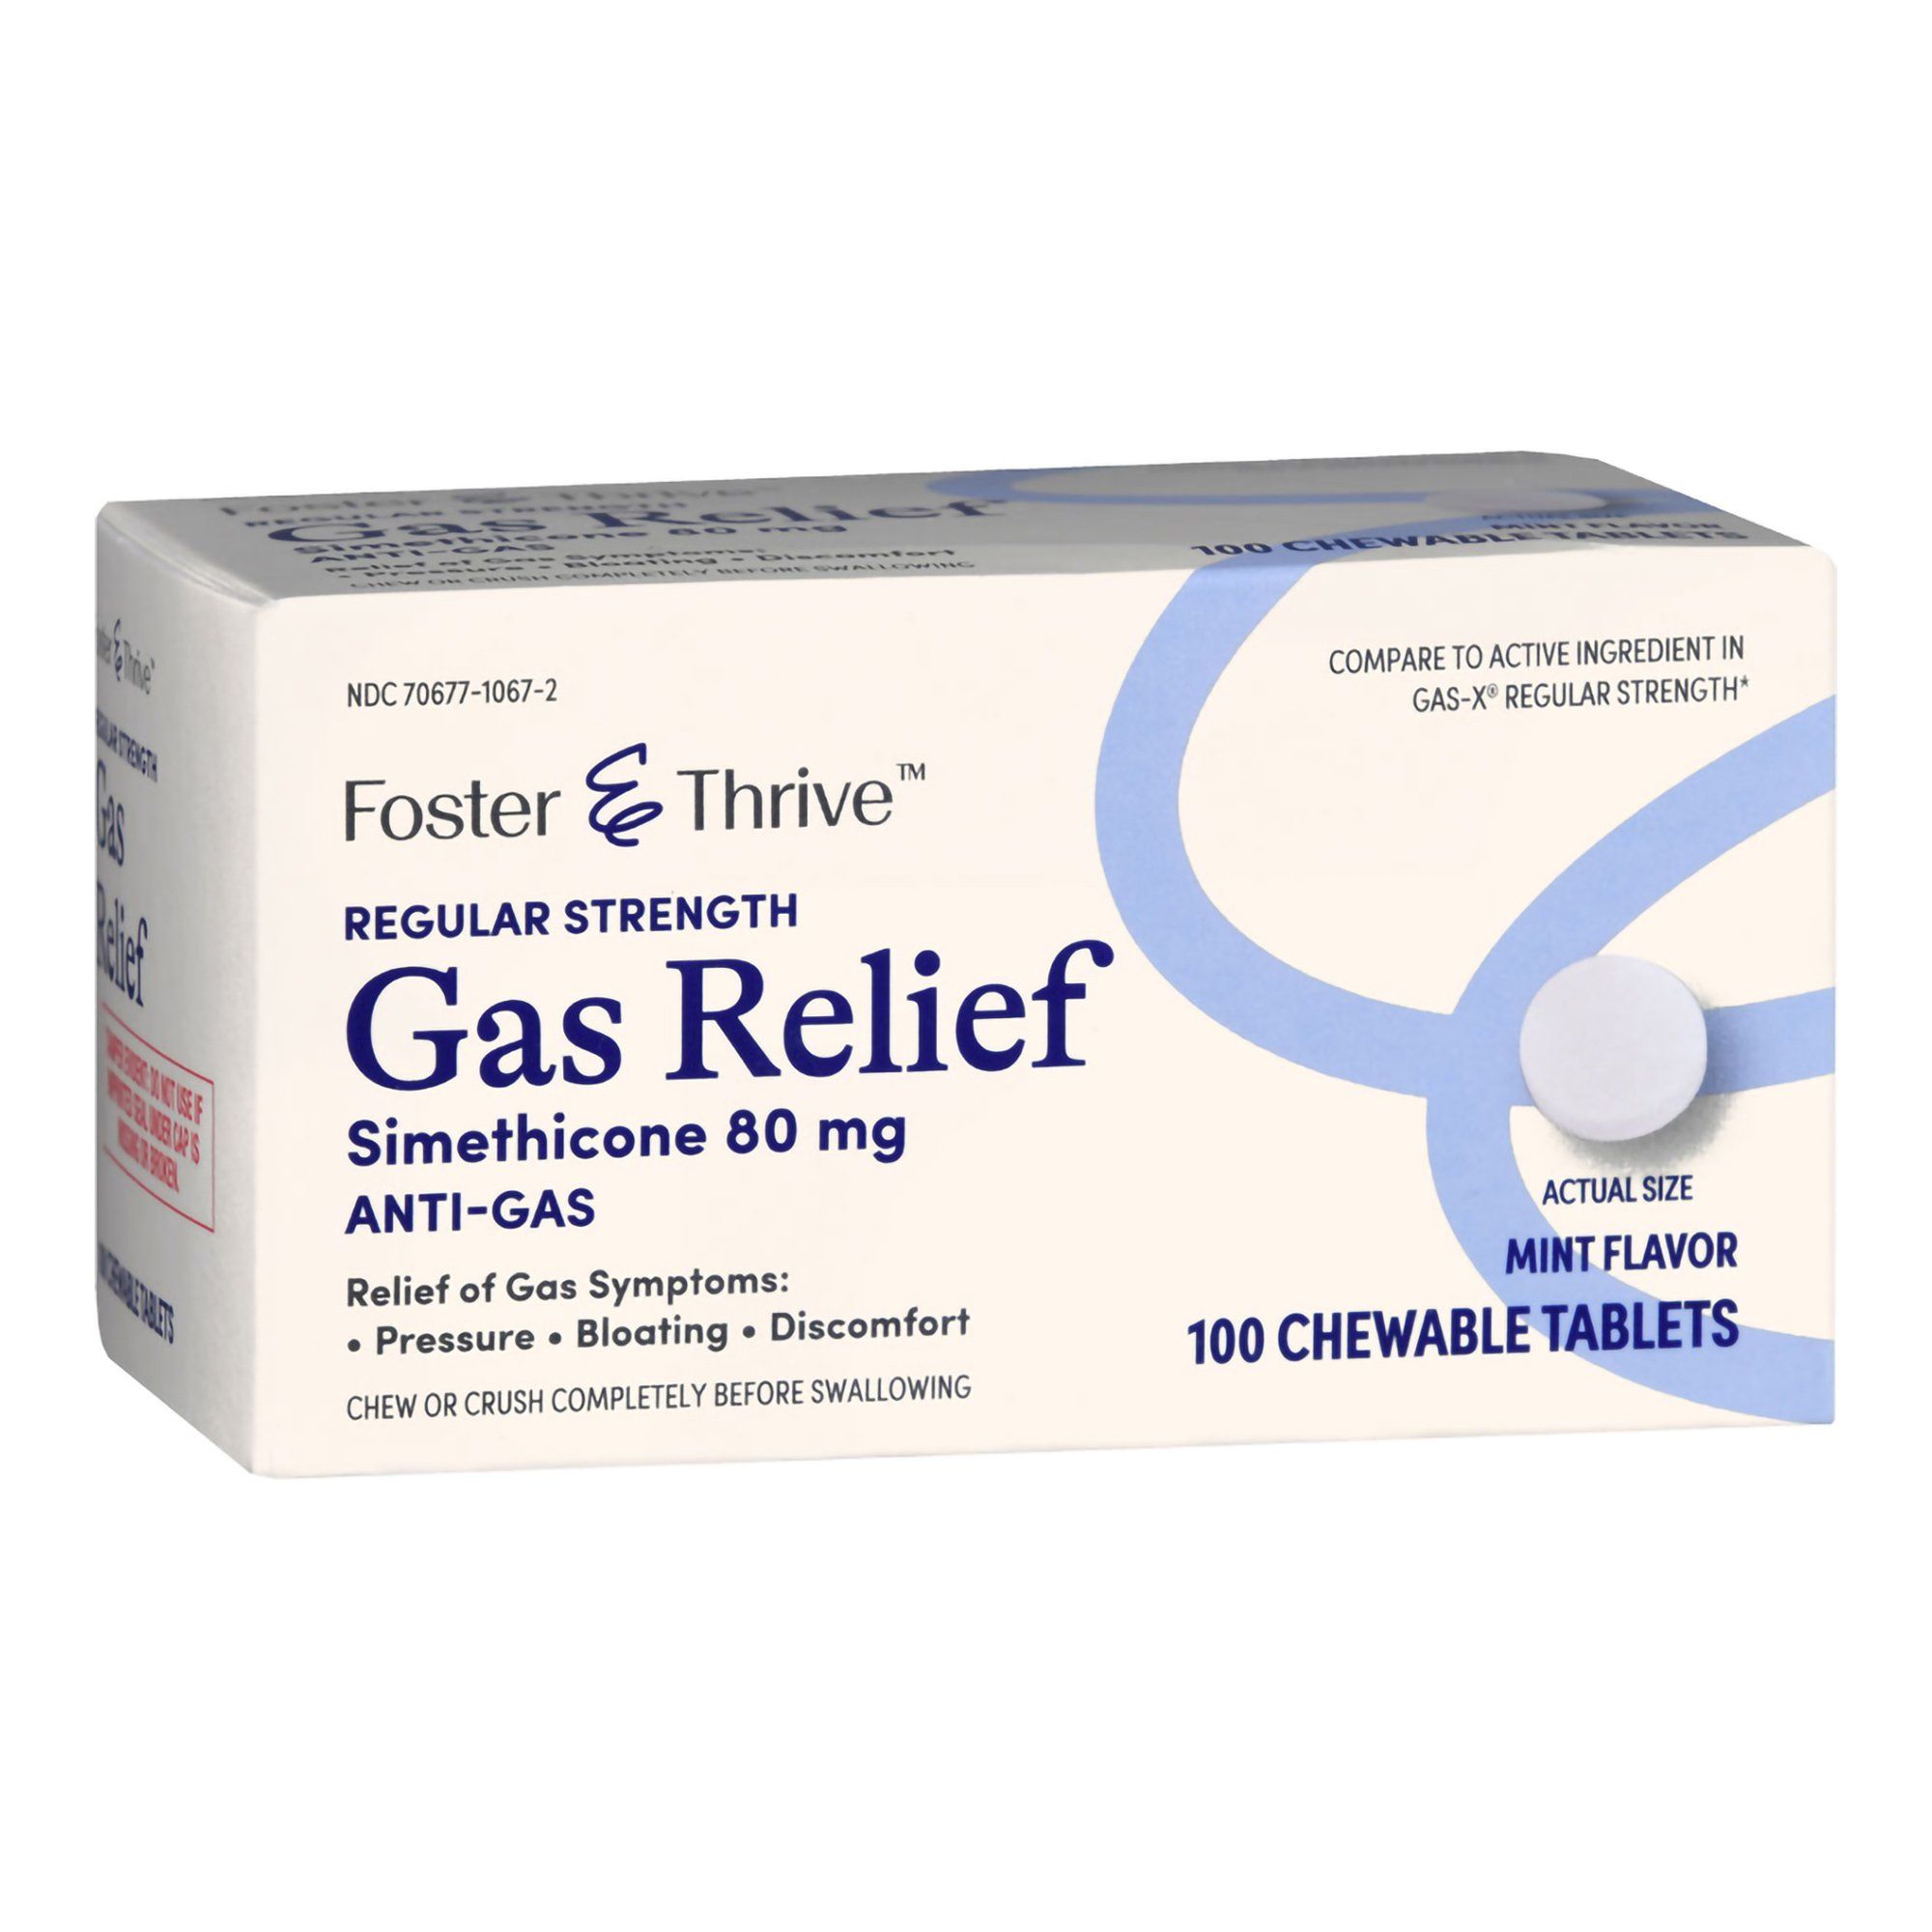 Foster & Thrive Regular Strength Gas Relief Chewable Tablets, 80 mg, Mint - 100 ct